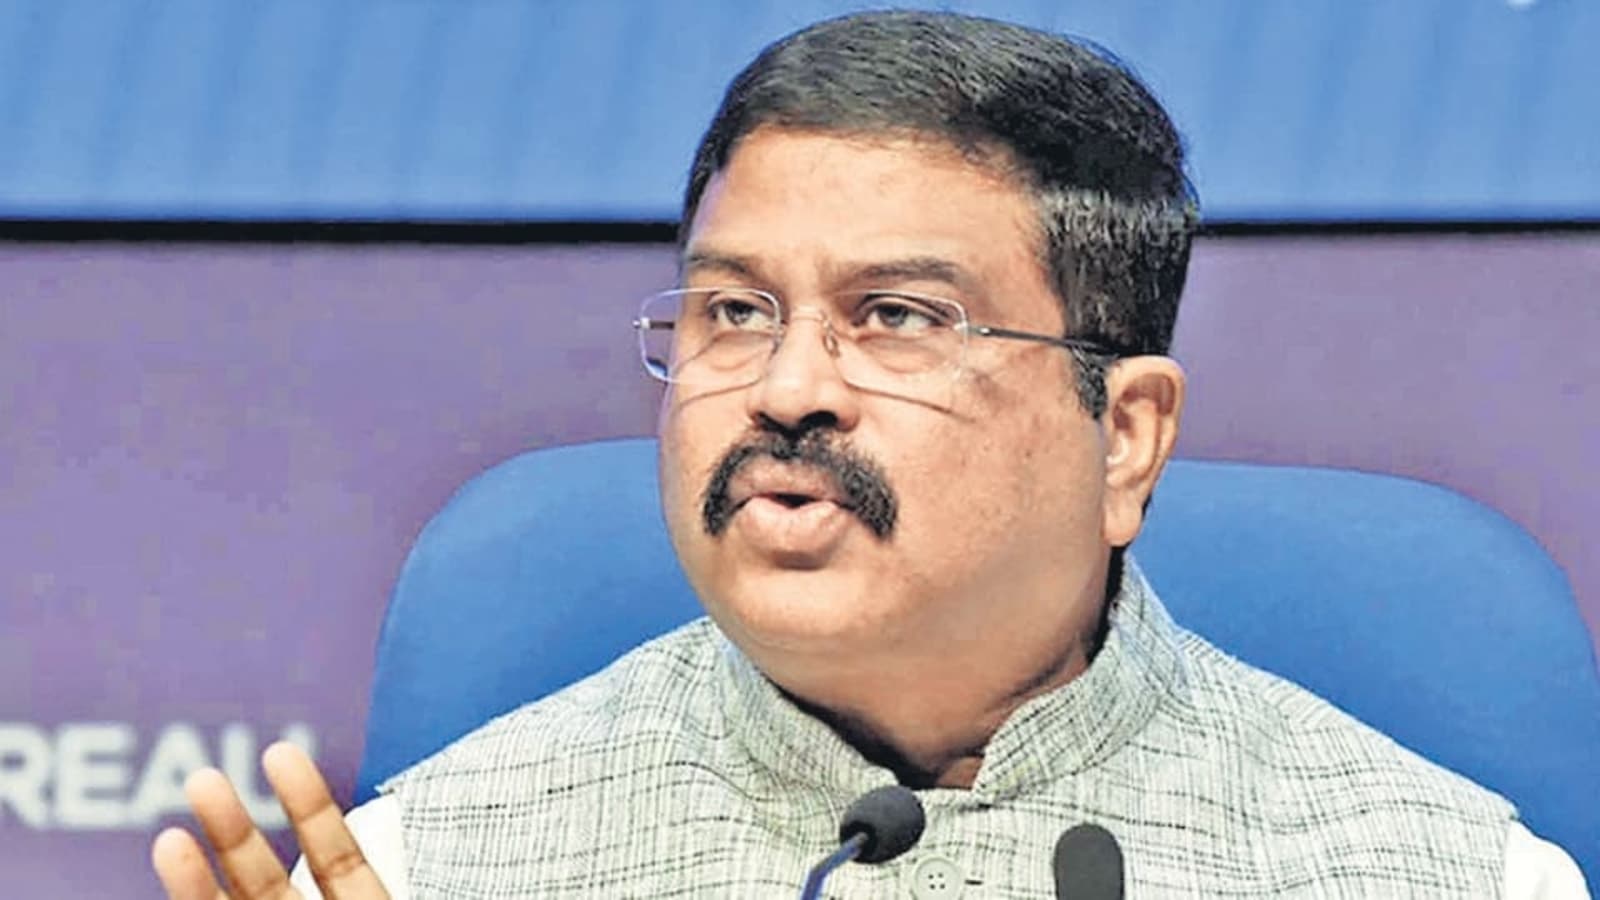 5G rollout will benefit education sector in big way: Dharmendra Pradhan